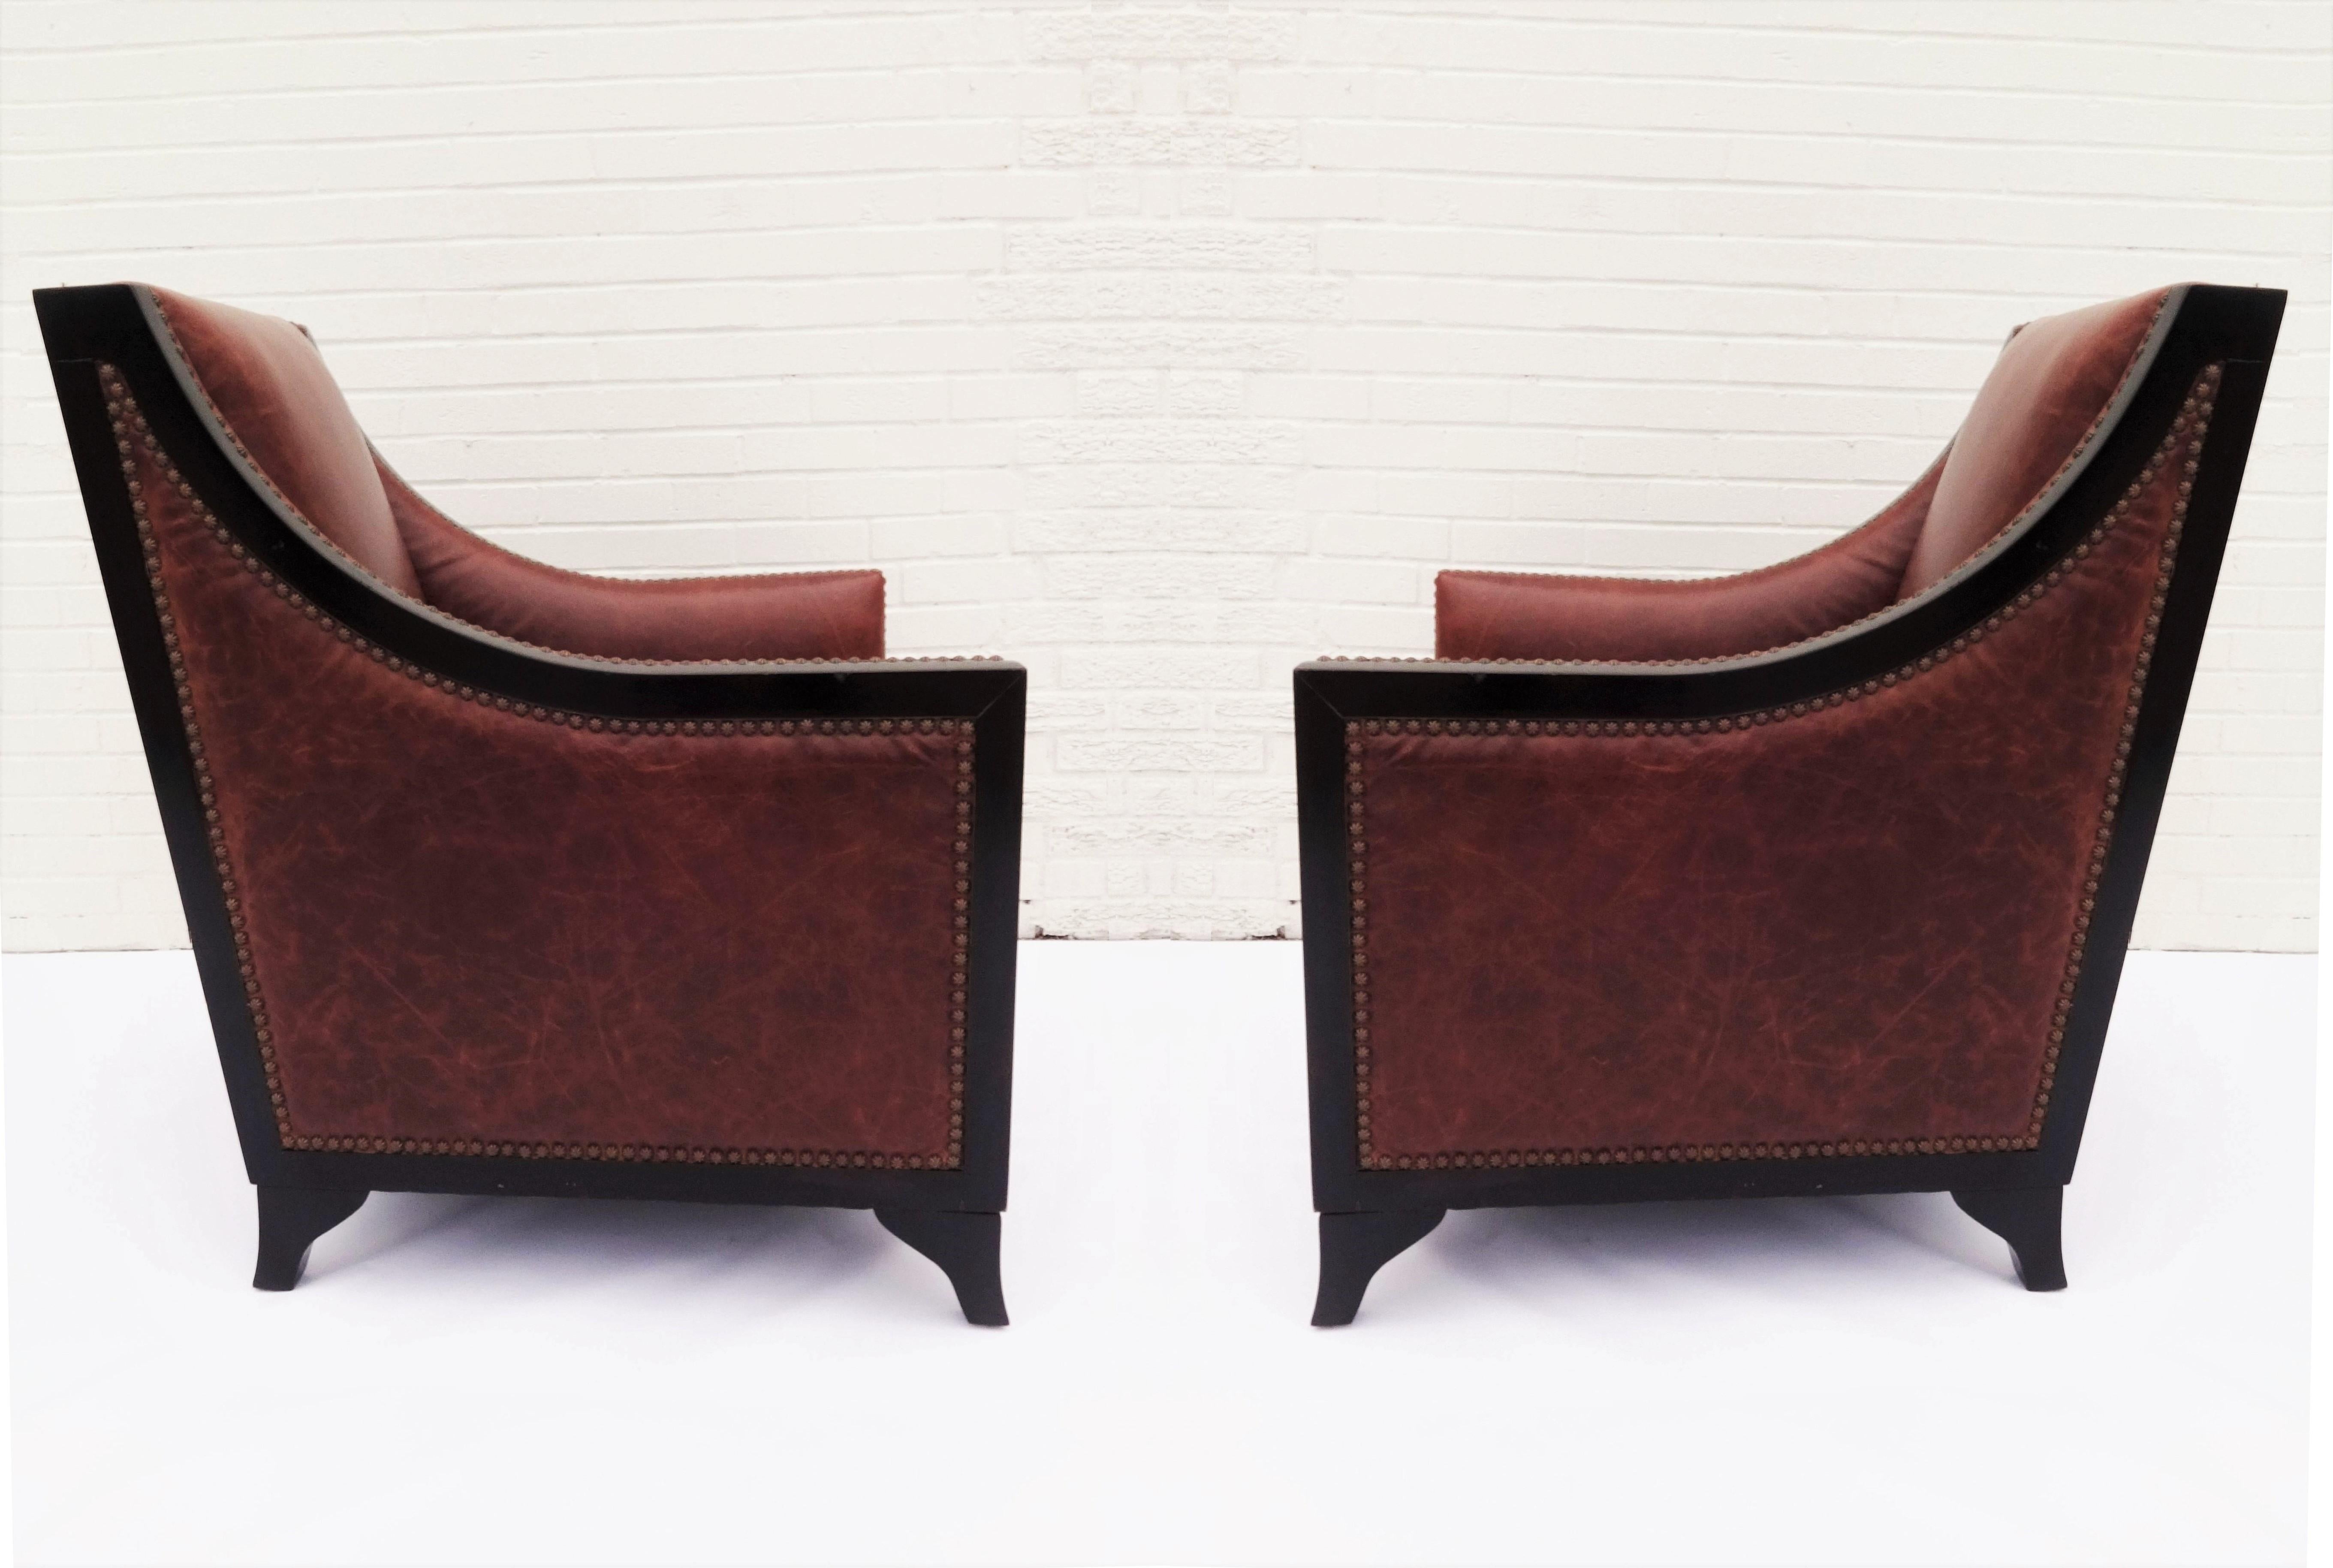 Lacquered Pair of Cognac Leather Lounge Chairs